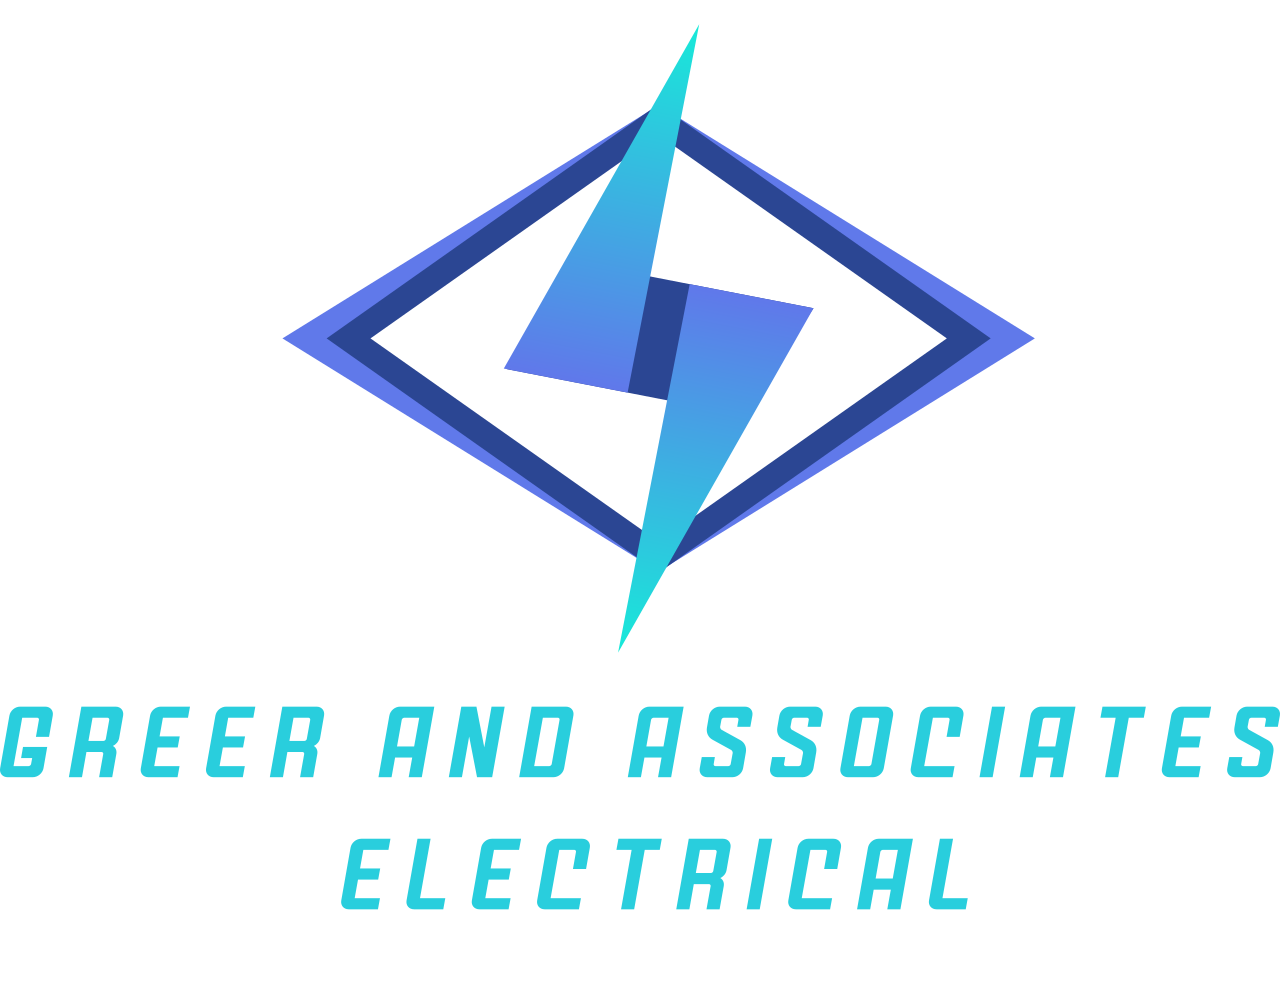 Greer and associates 
Electrical's logo